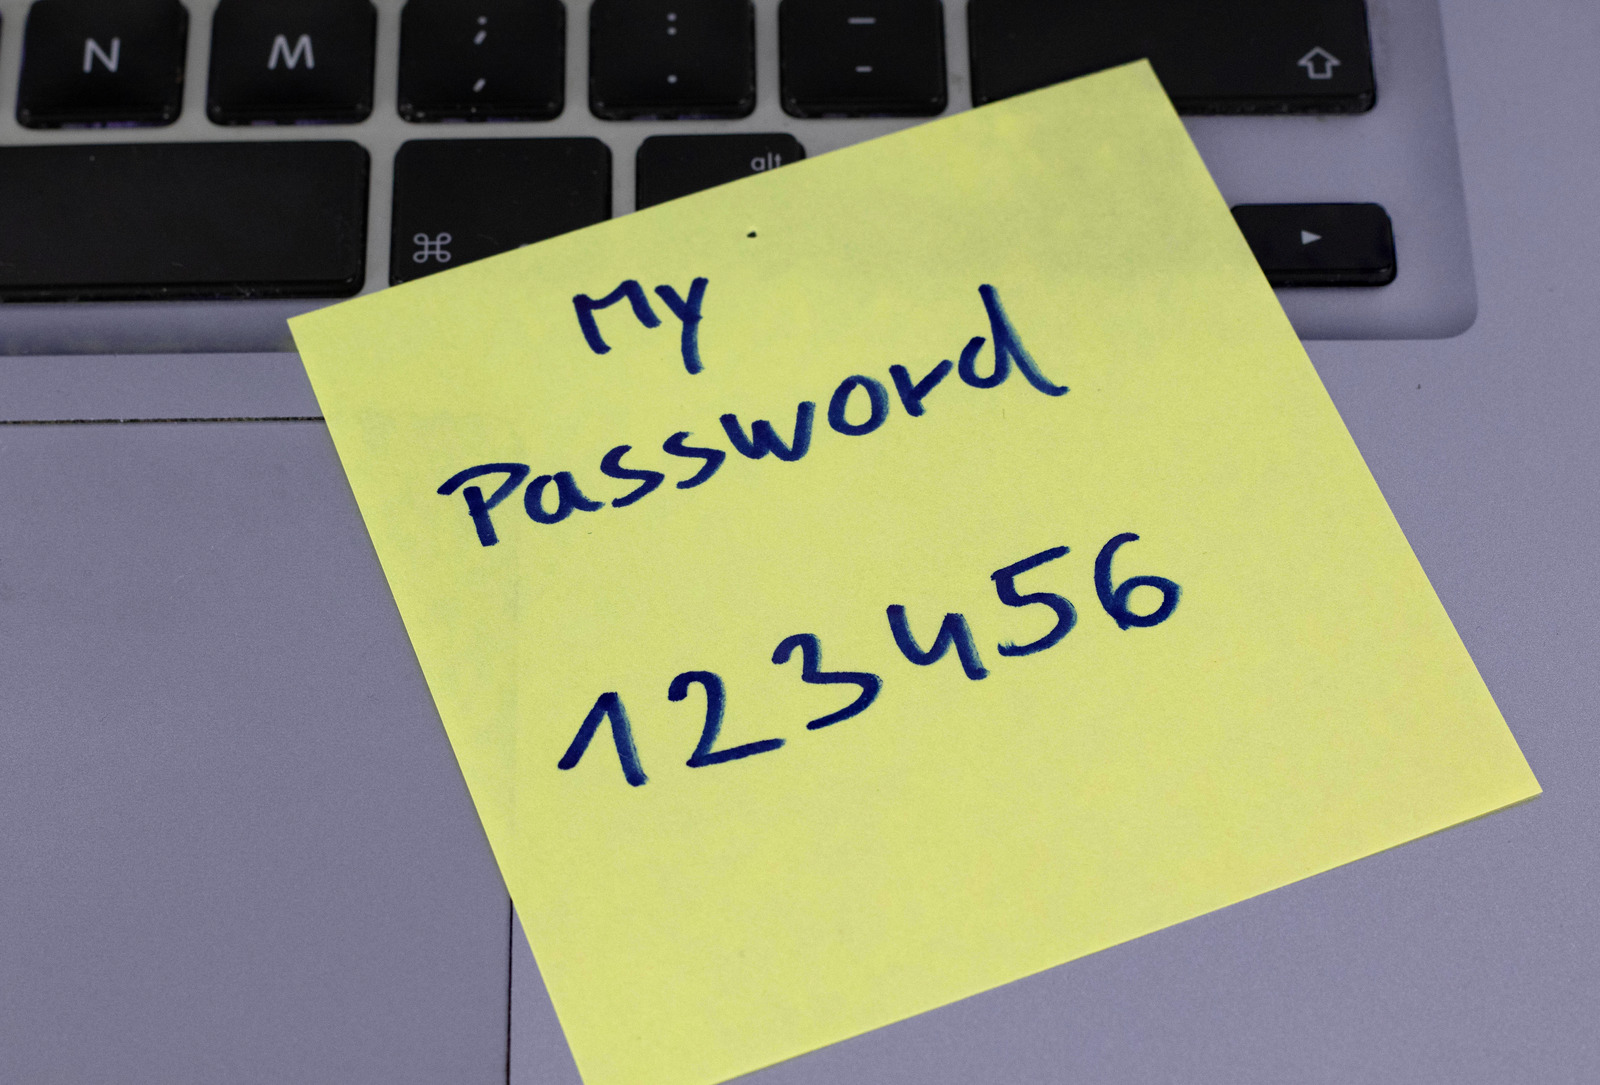 Despite an abundance of information on the risks of password reuse, a considerable number of users still recycle the same passwords.